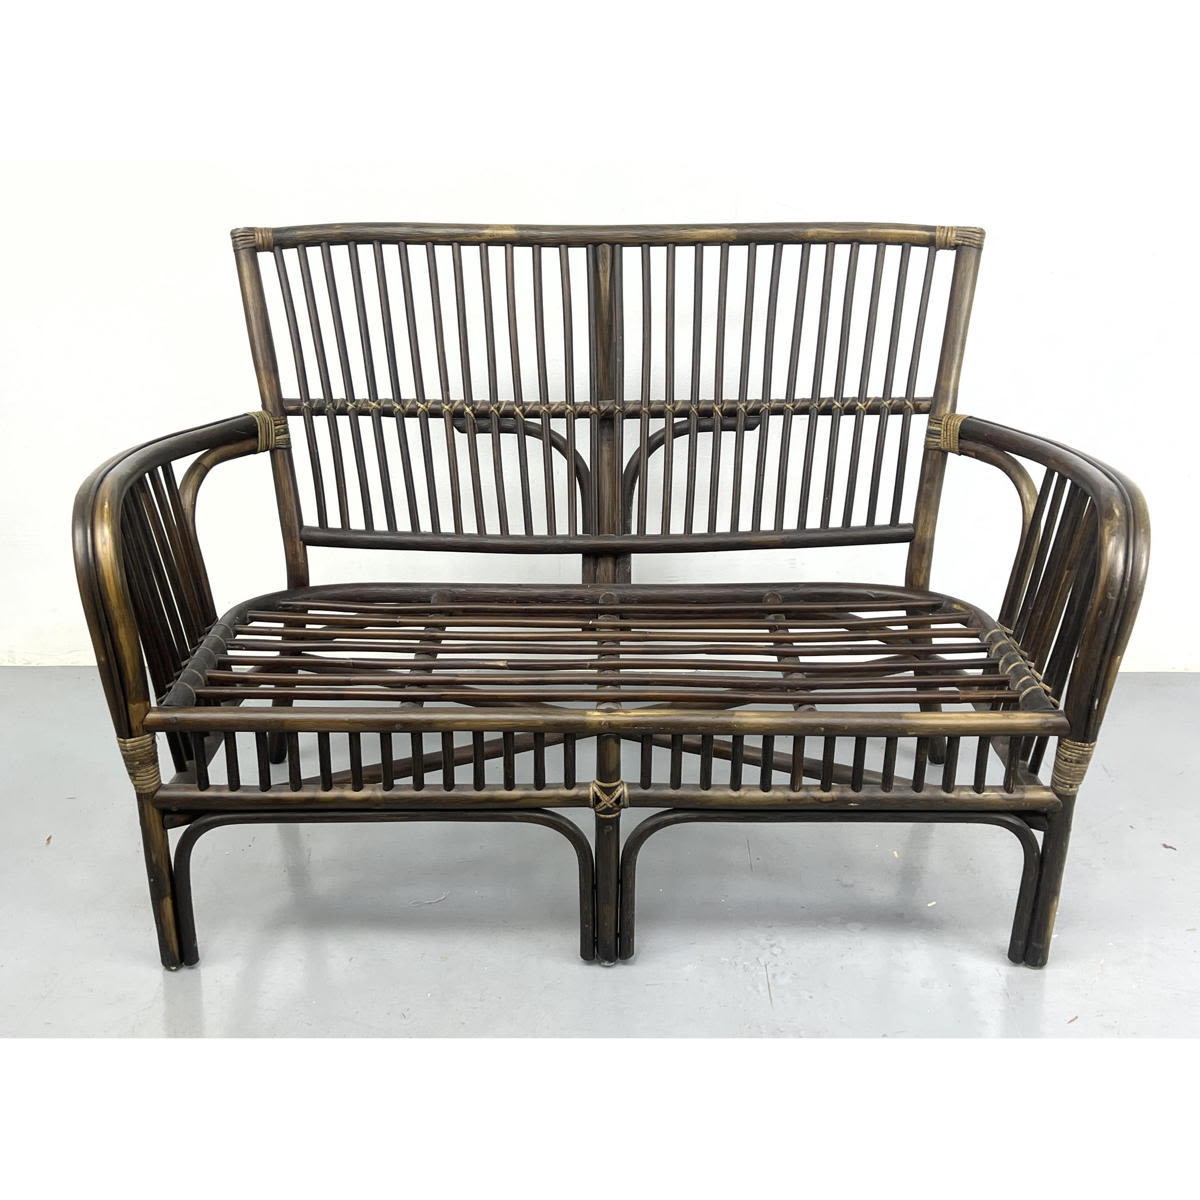 Rattan Vintage Love Seat Couch.